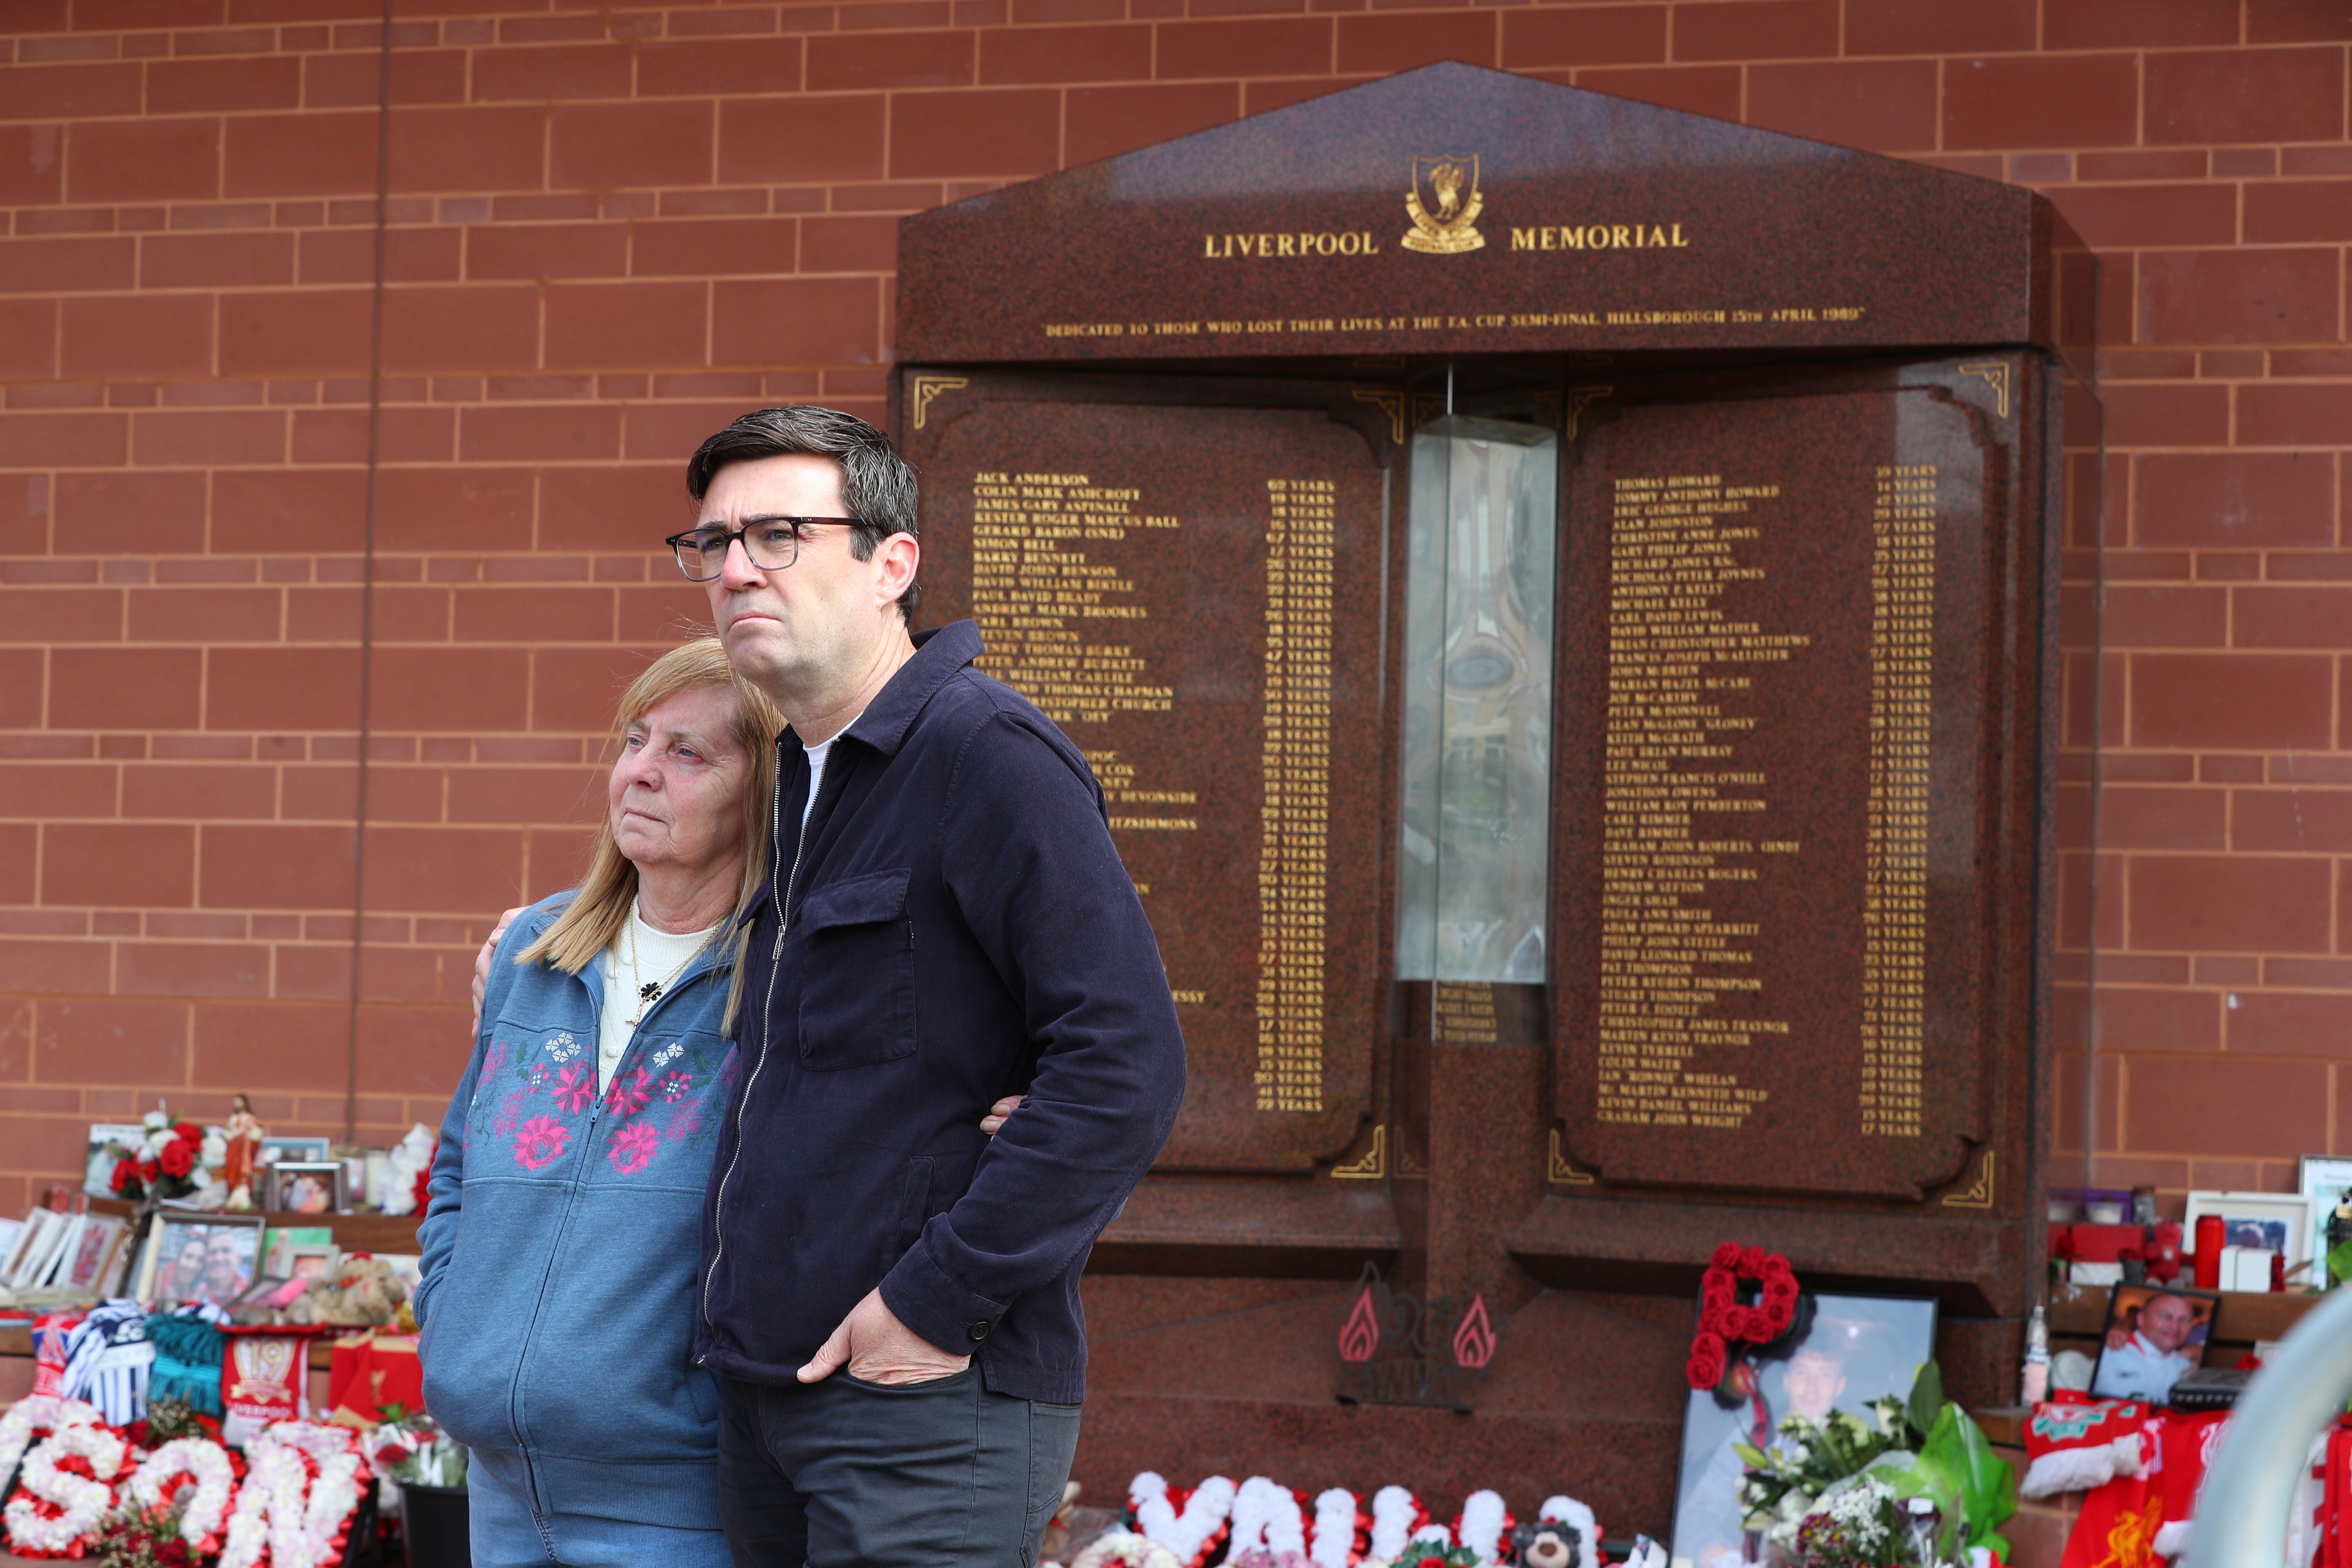 Hillsborough campaigner Margaret Aspinall, and Andy Burnham, mayor of Greater Manchester, outside Anfield stadium at the Hillsborough memorial (Peter Byrne/PA)